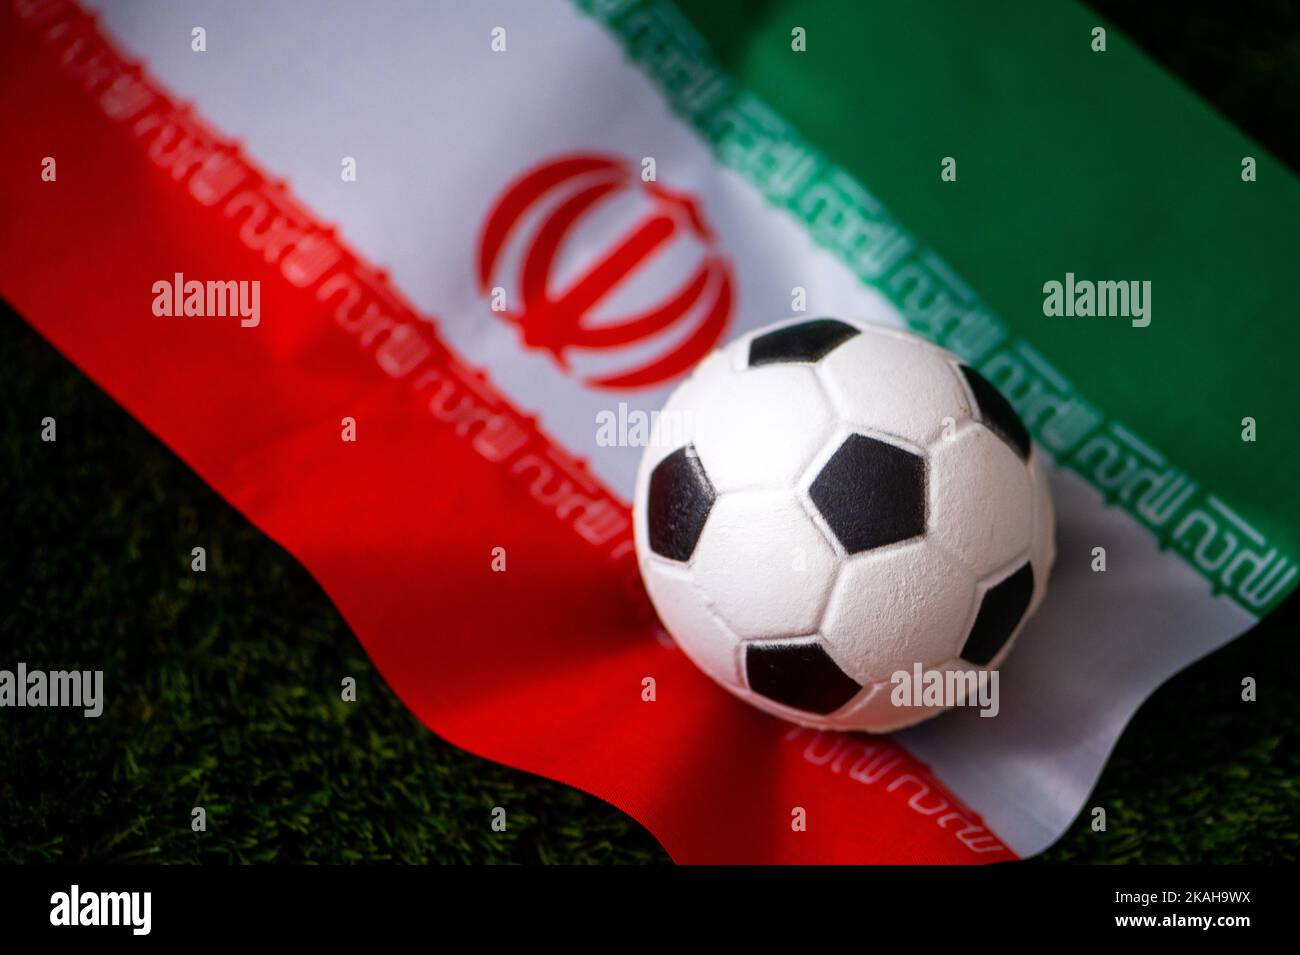 Iran's Soccer Champions Esteghlal Get Off To Rocky Start In New Season -  Iran Front Page